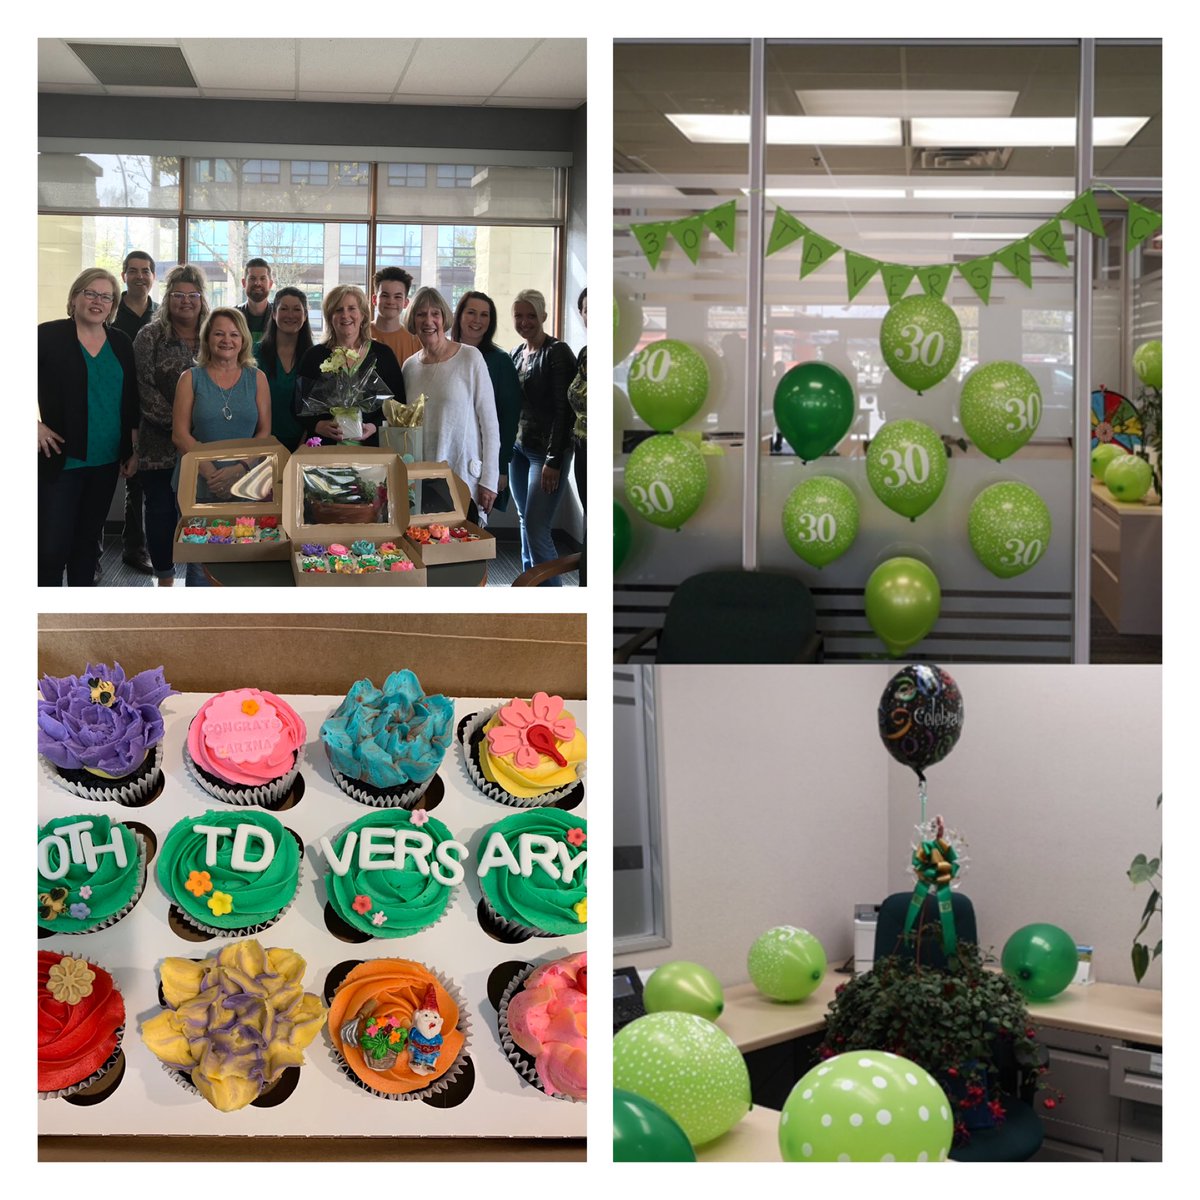 It’s an honour to celebrate our Branch Manager of TD MURRAYVILLE 30th Year       TD-versary! Congratulations Carina, on this amazing milestone in your career 💚💚@Carinalawtd @CSir_TD @Paul20070376 @KimTran_TD @sonia_hollinger @ASwanTD1 @AndyCribb_TD @wilmarossnagel @BakingGirl4